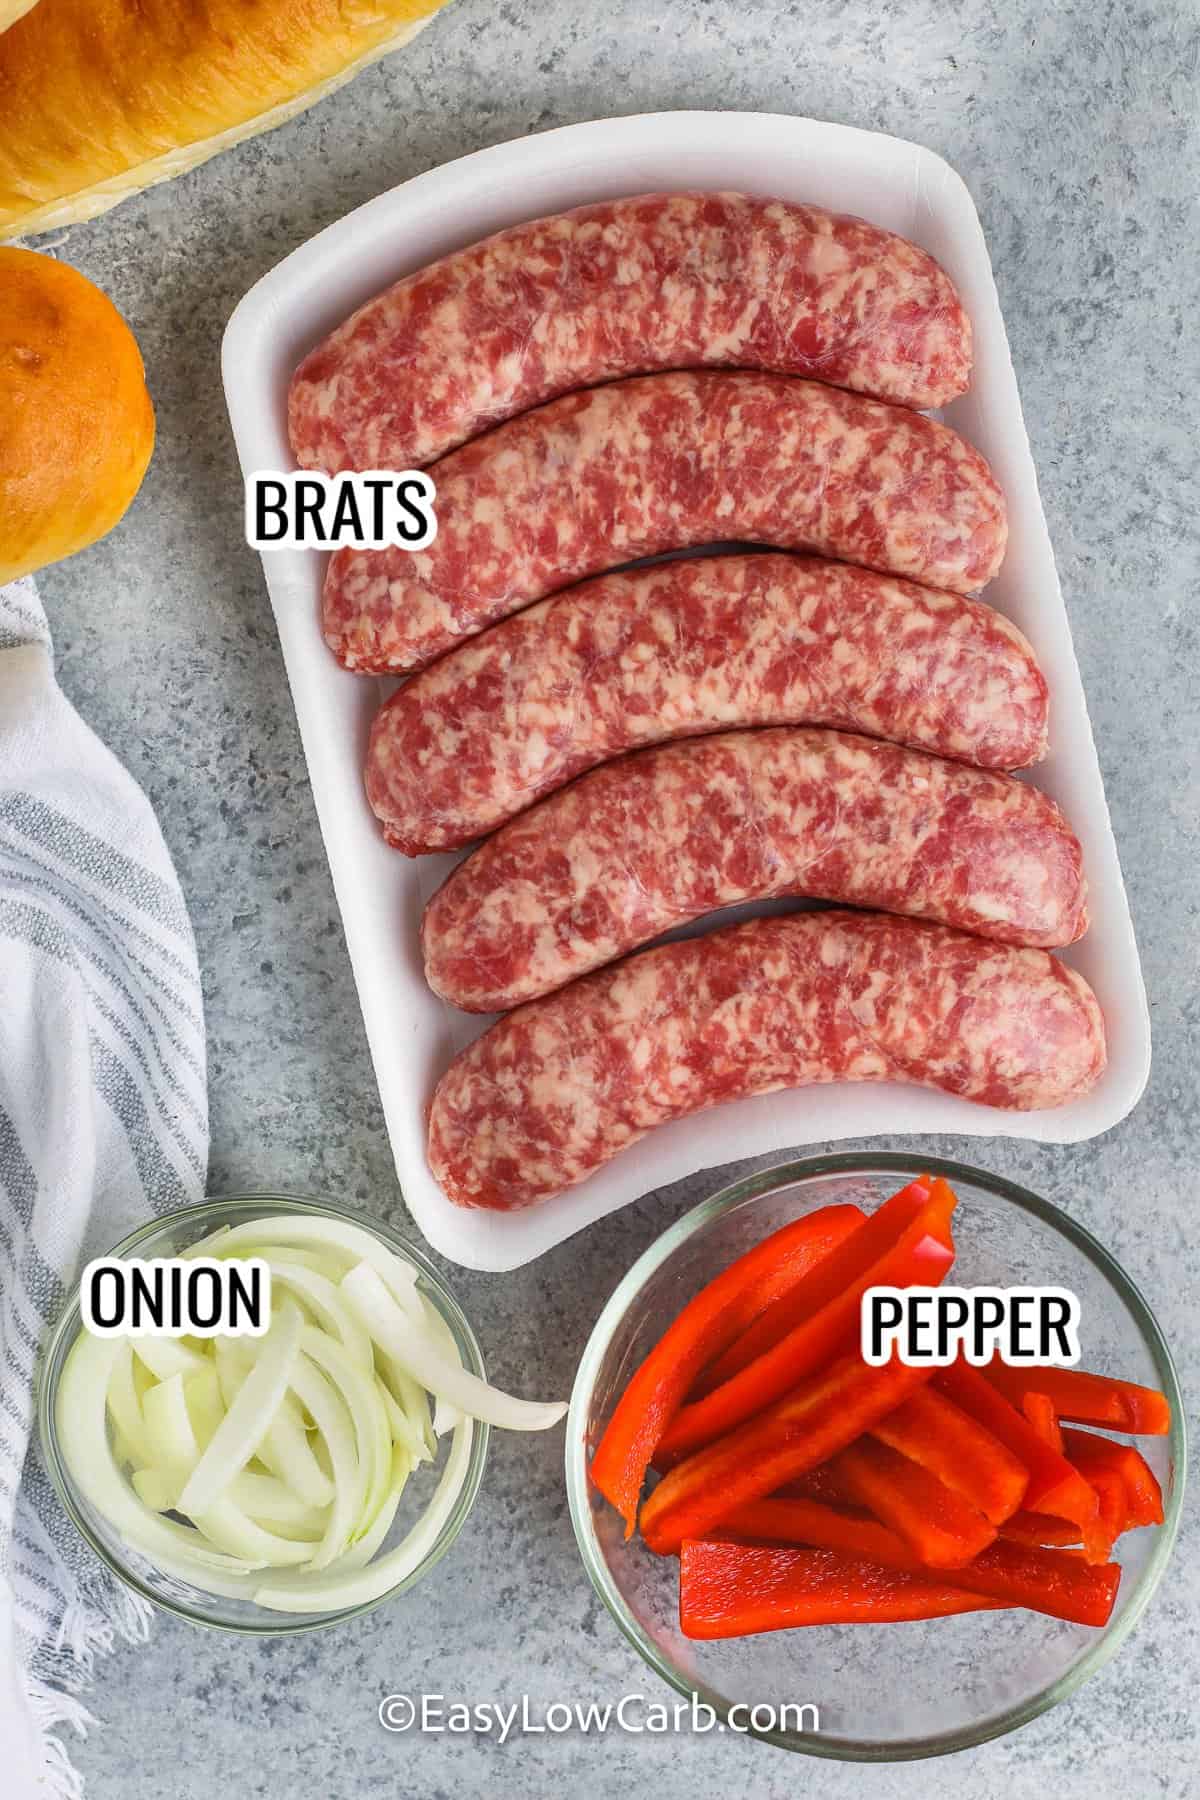 ingredients assembled to make brats with peppers and onions including brats, onions, and peppers